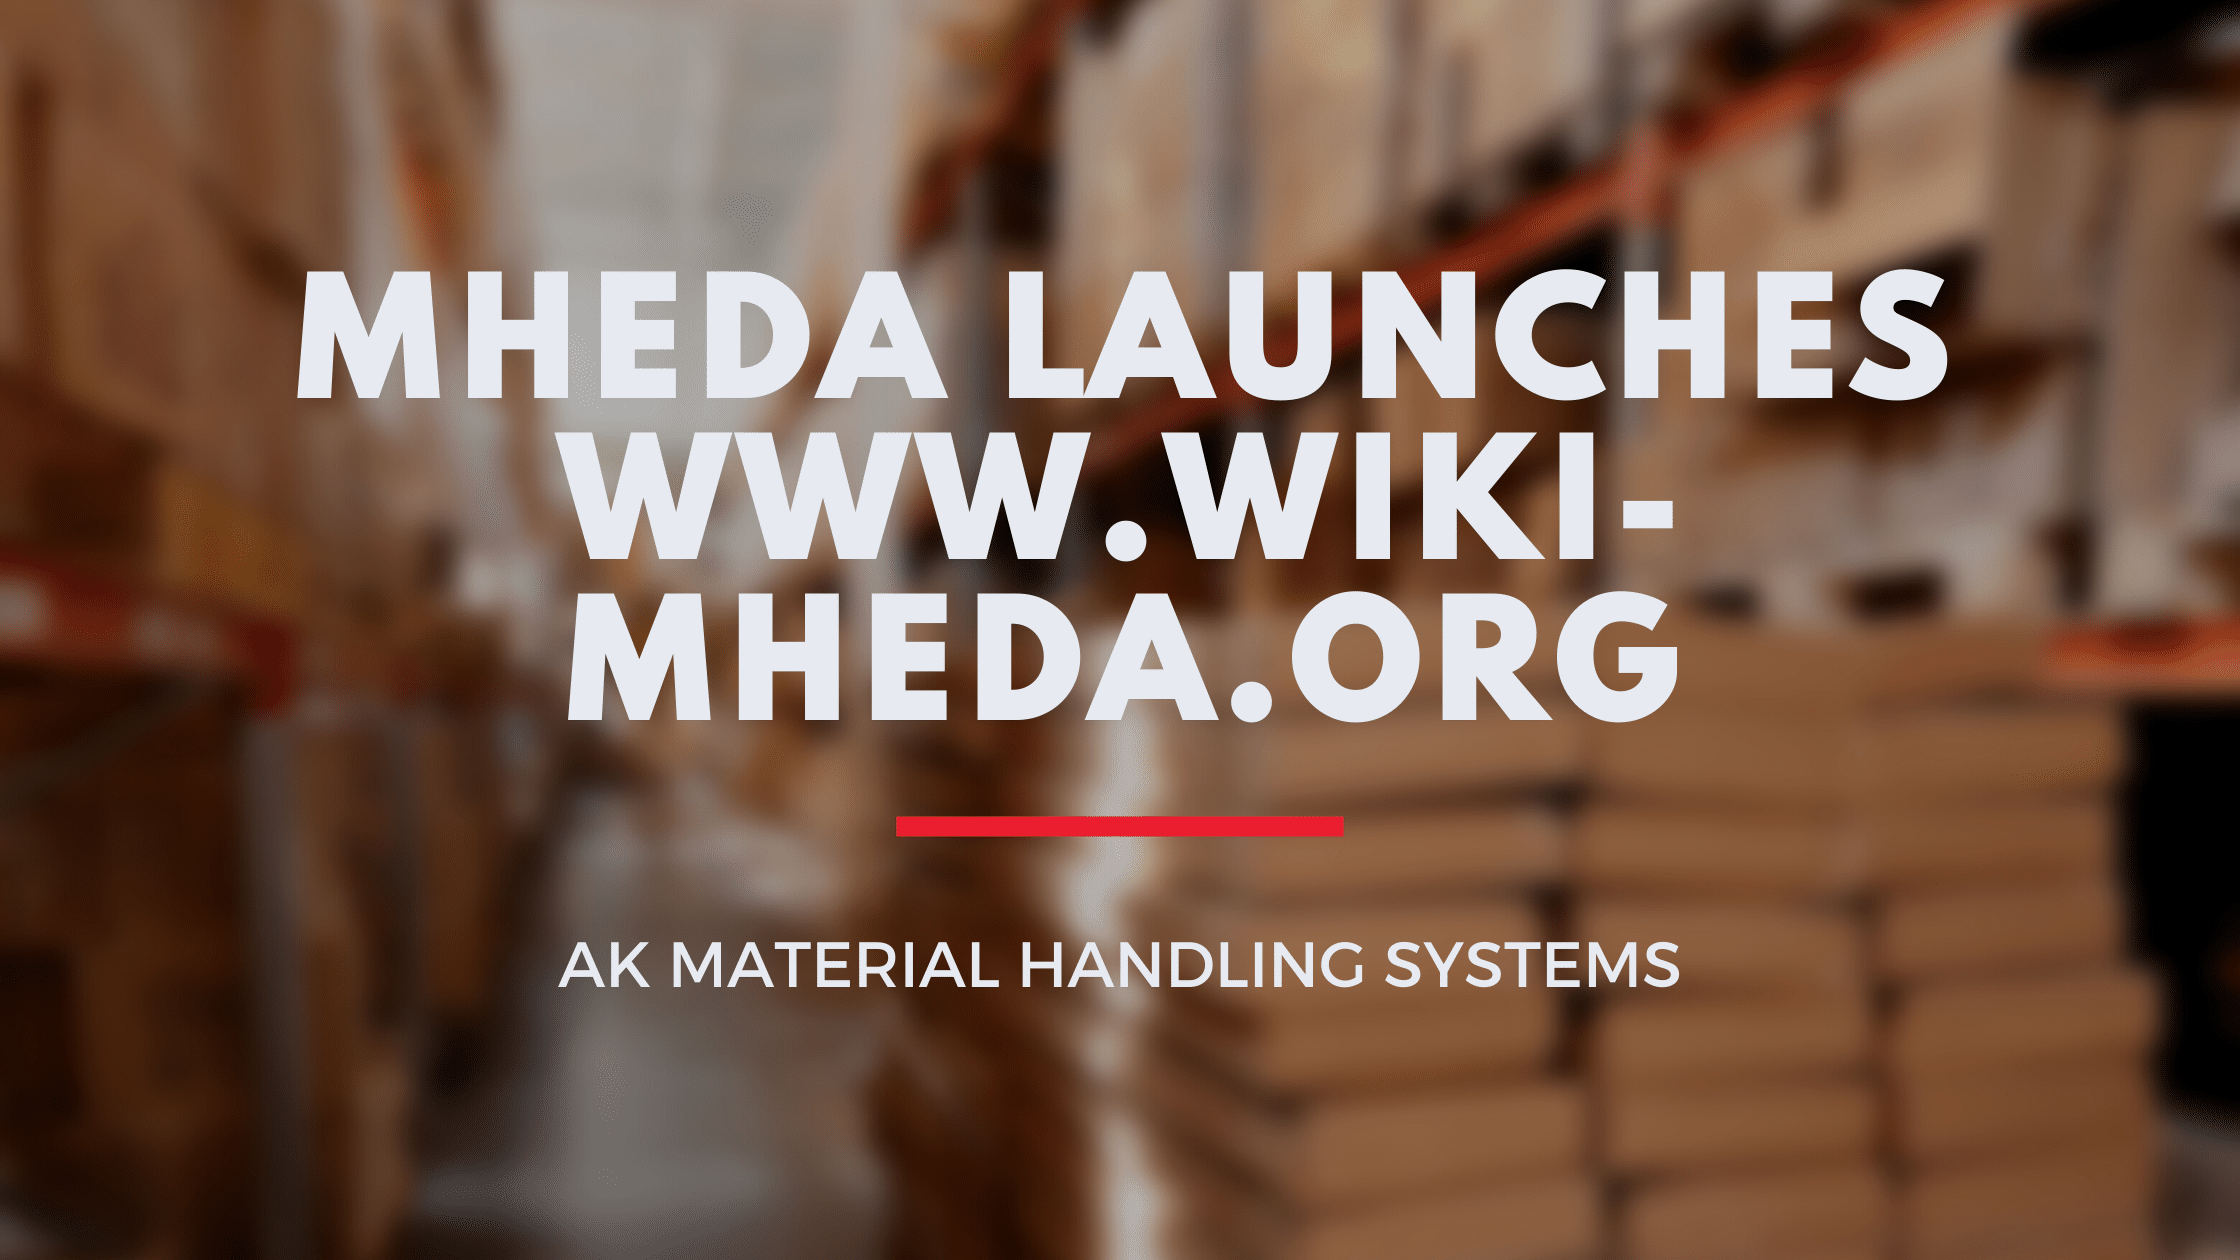 Mheda launches www.wiki-mheda.org.